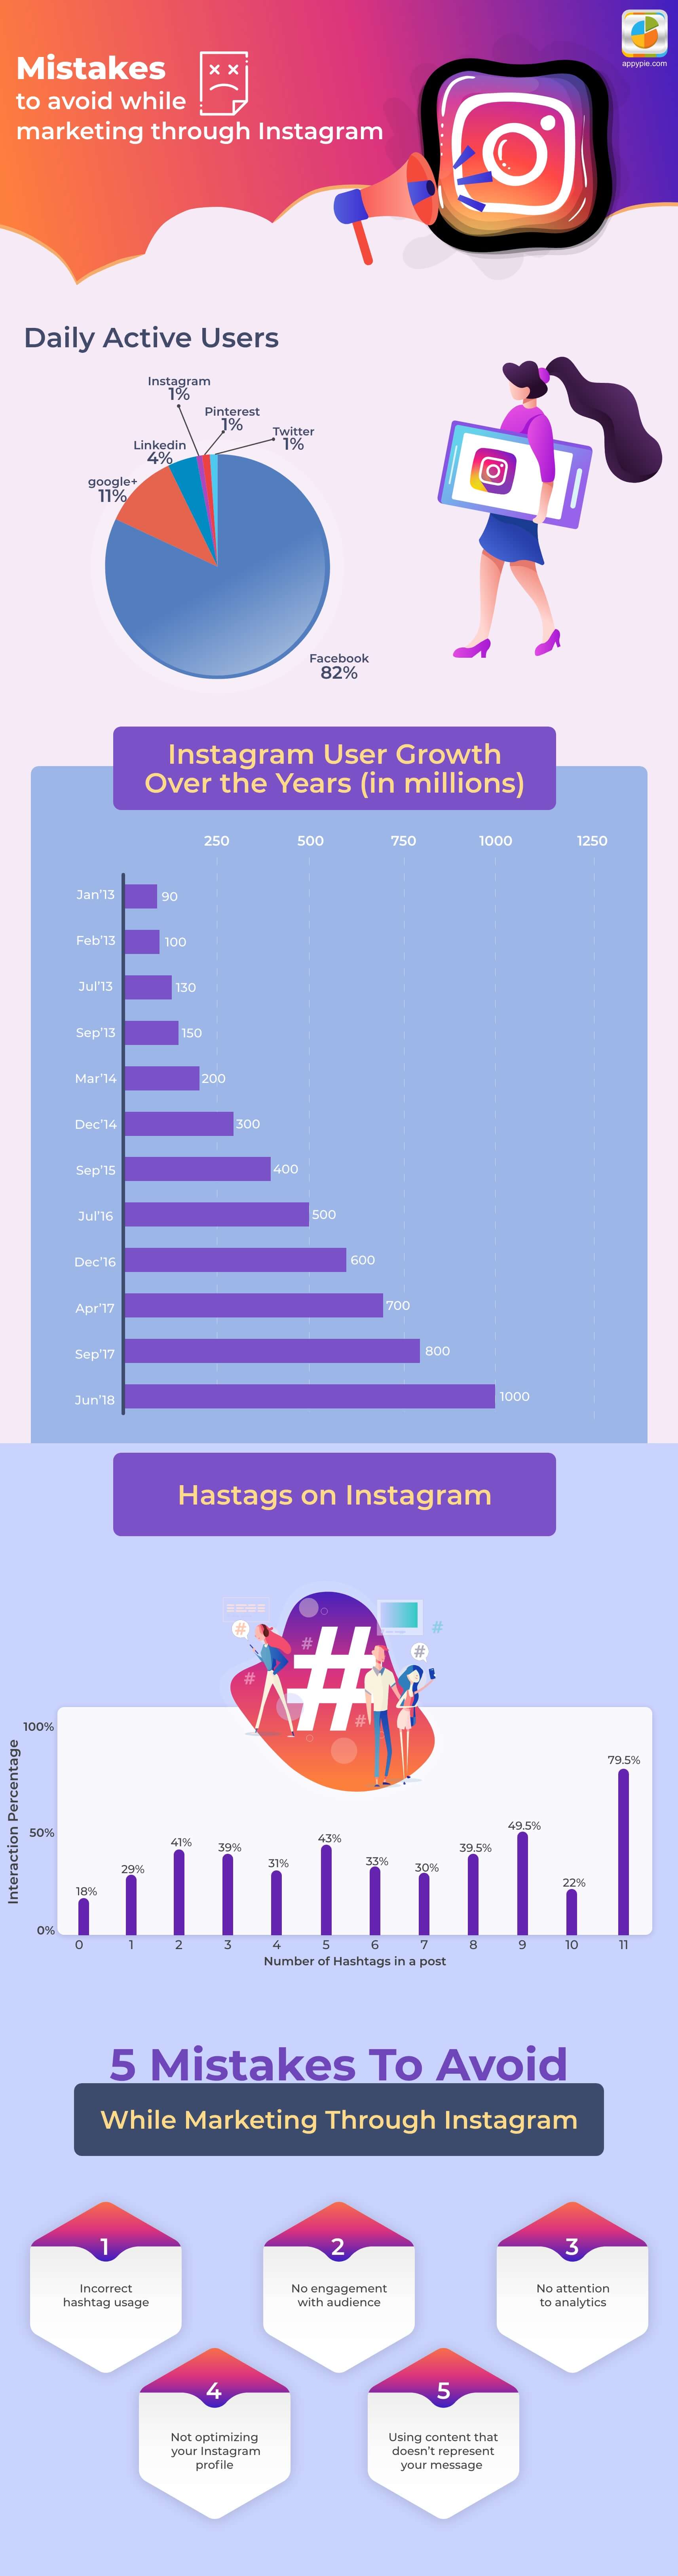 Mistakes to Avoid While Marketing on Instagram